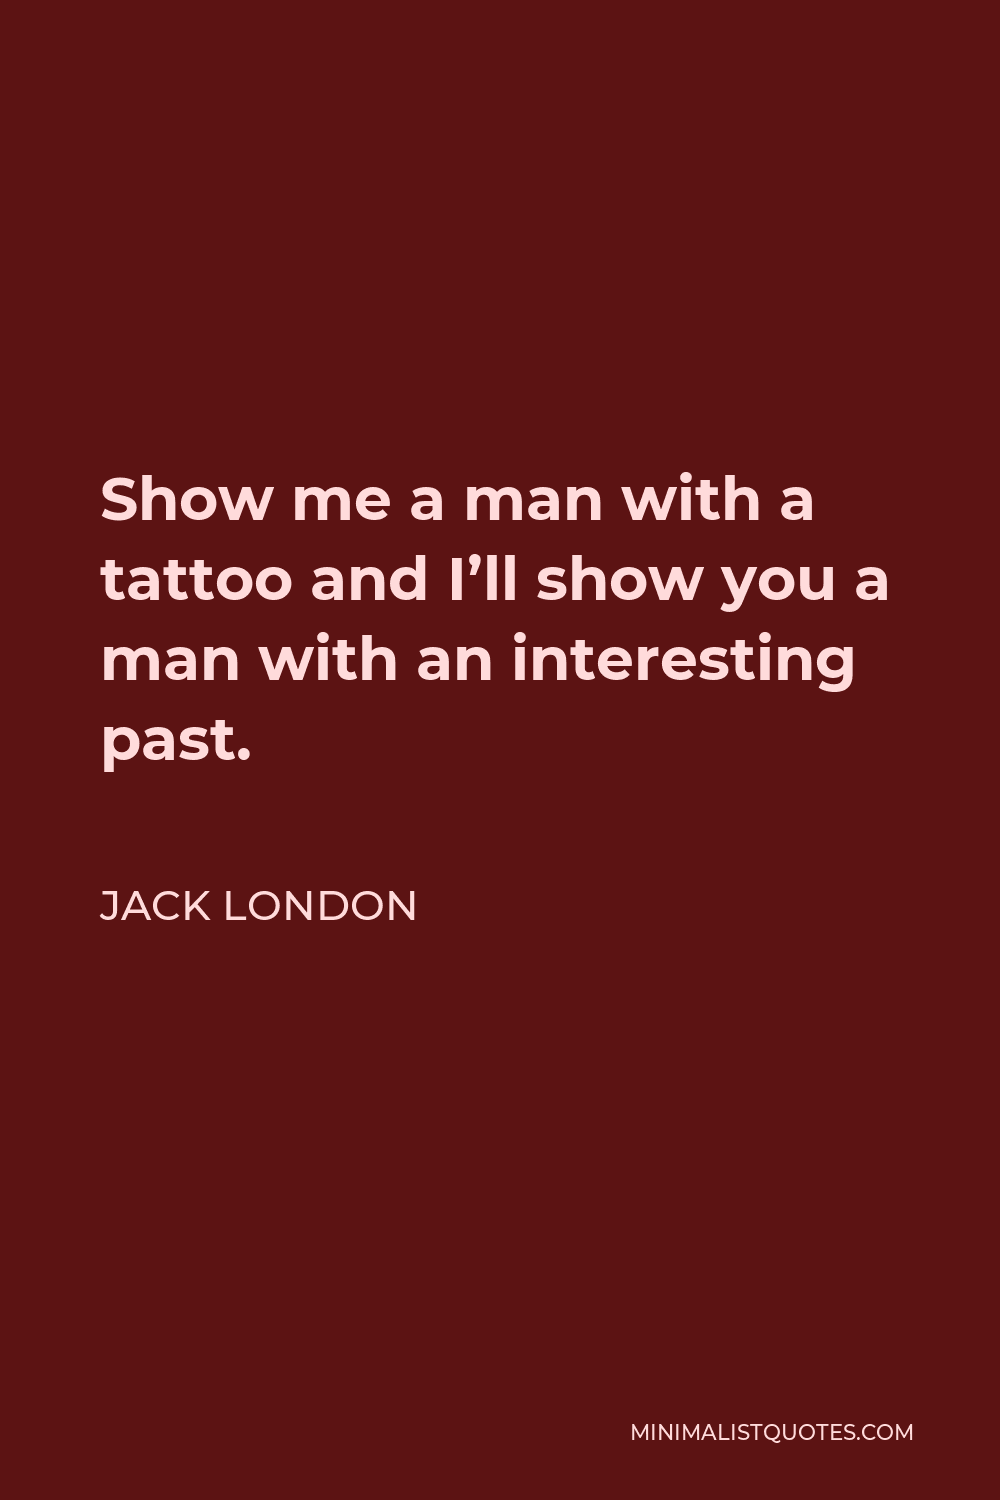 Jack London Quote - Show me a man with a tattoo and I’ll show you a man with an interesting past.